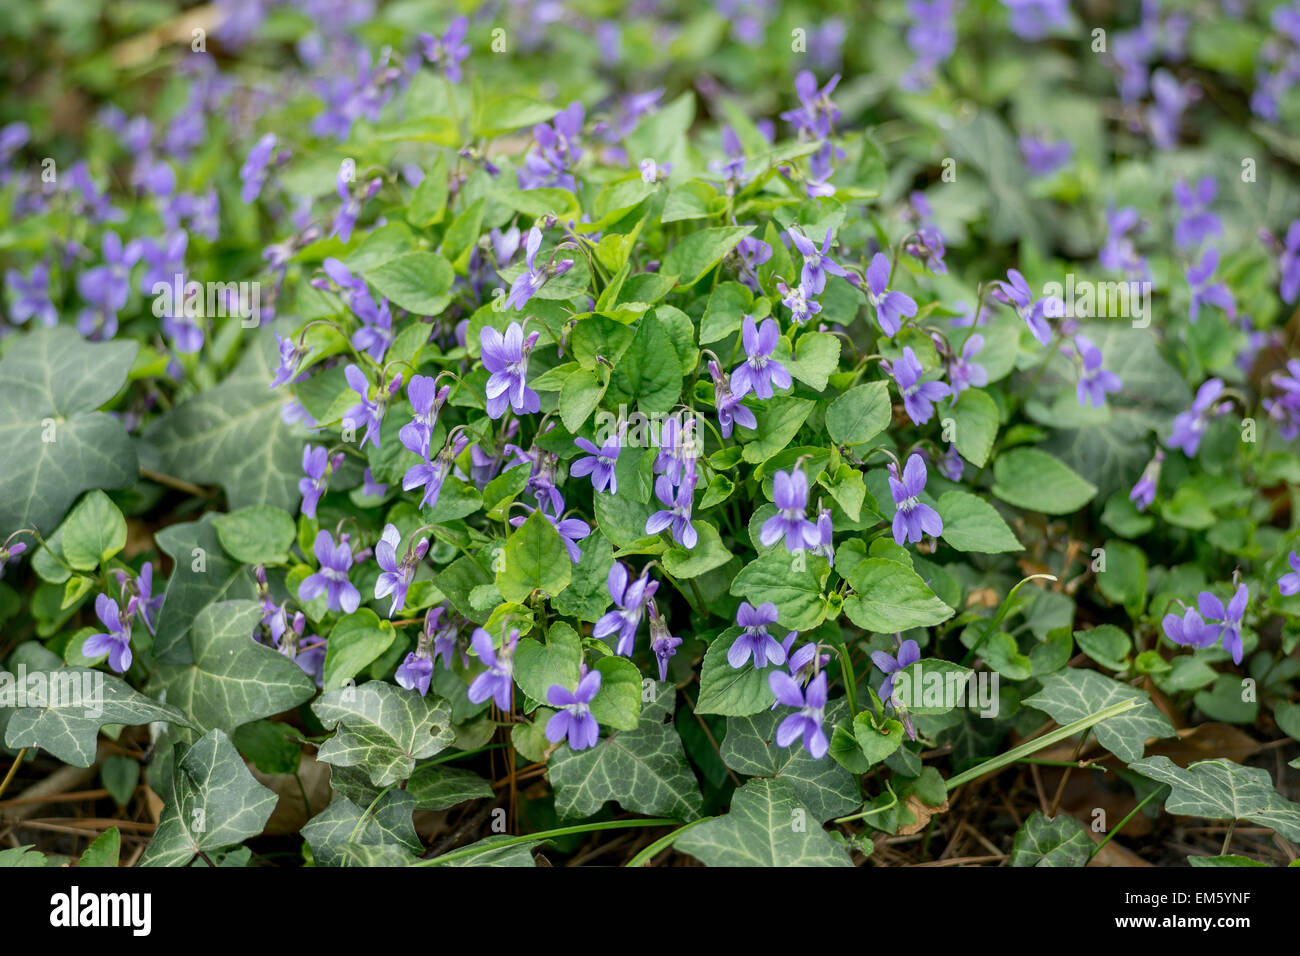 Common dog violet violets in cluster seen from the ground level Viola canina Stock Photo